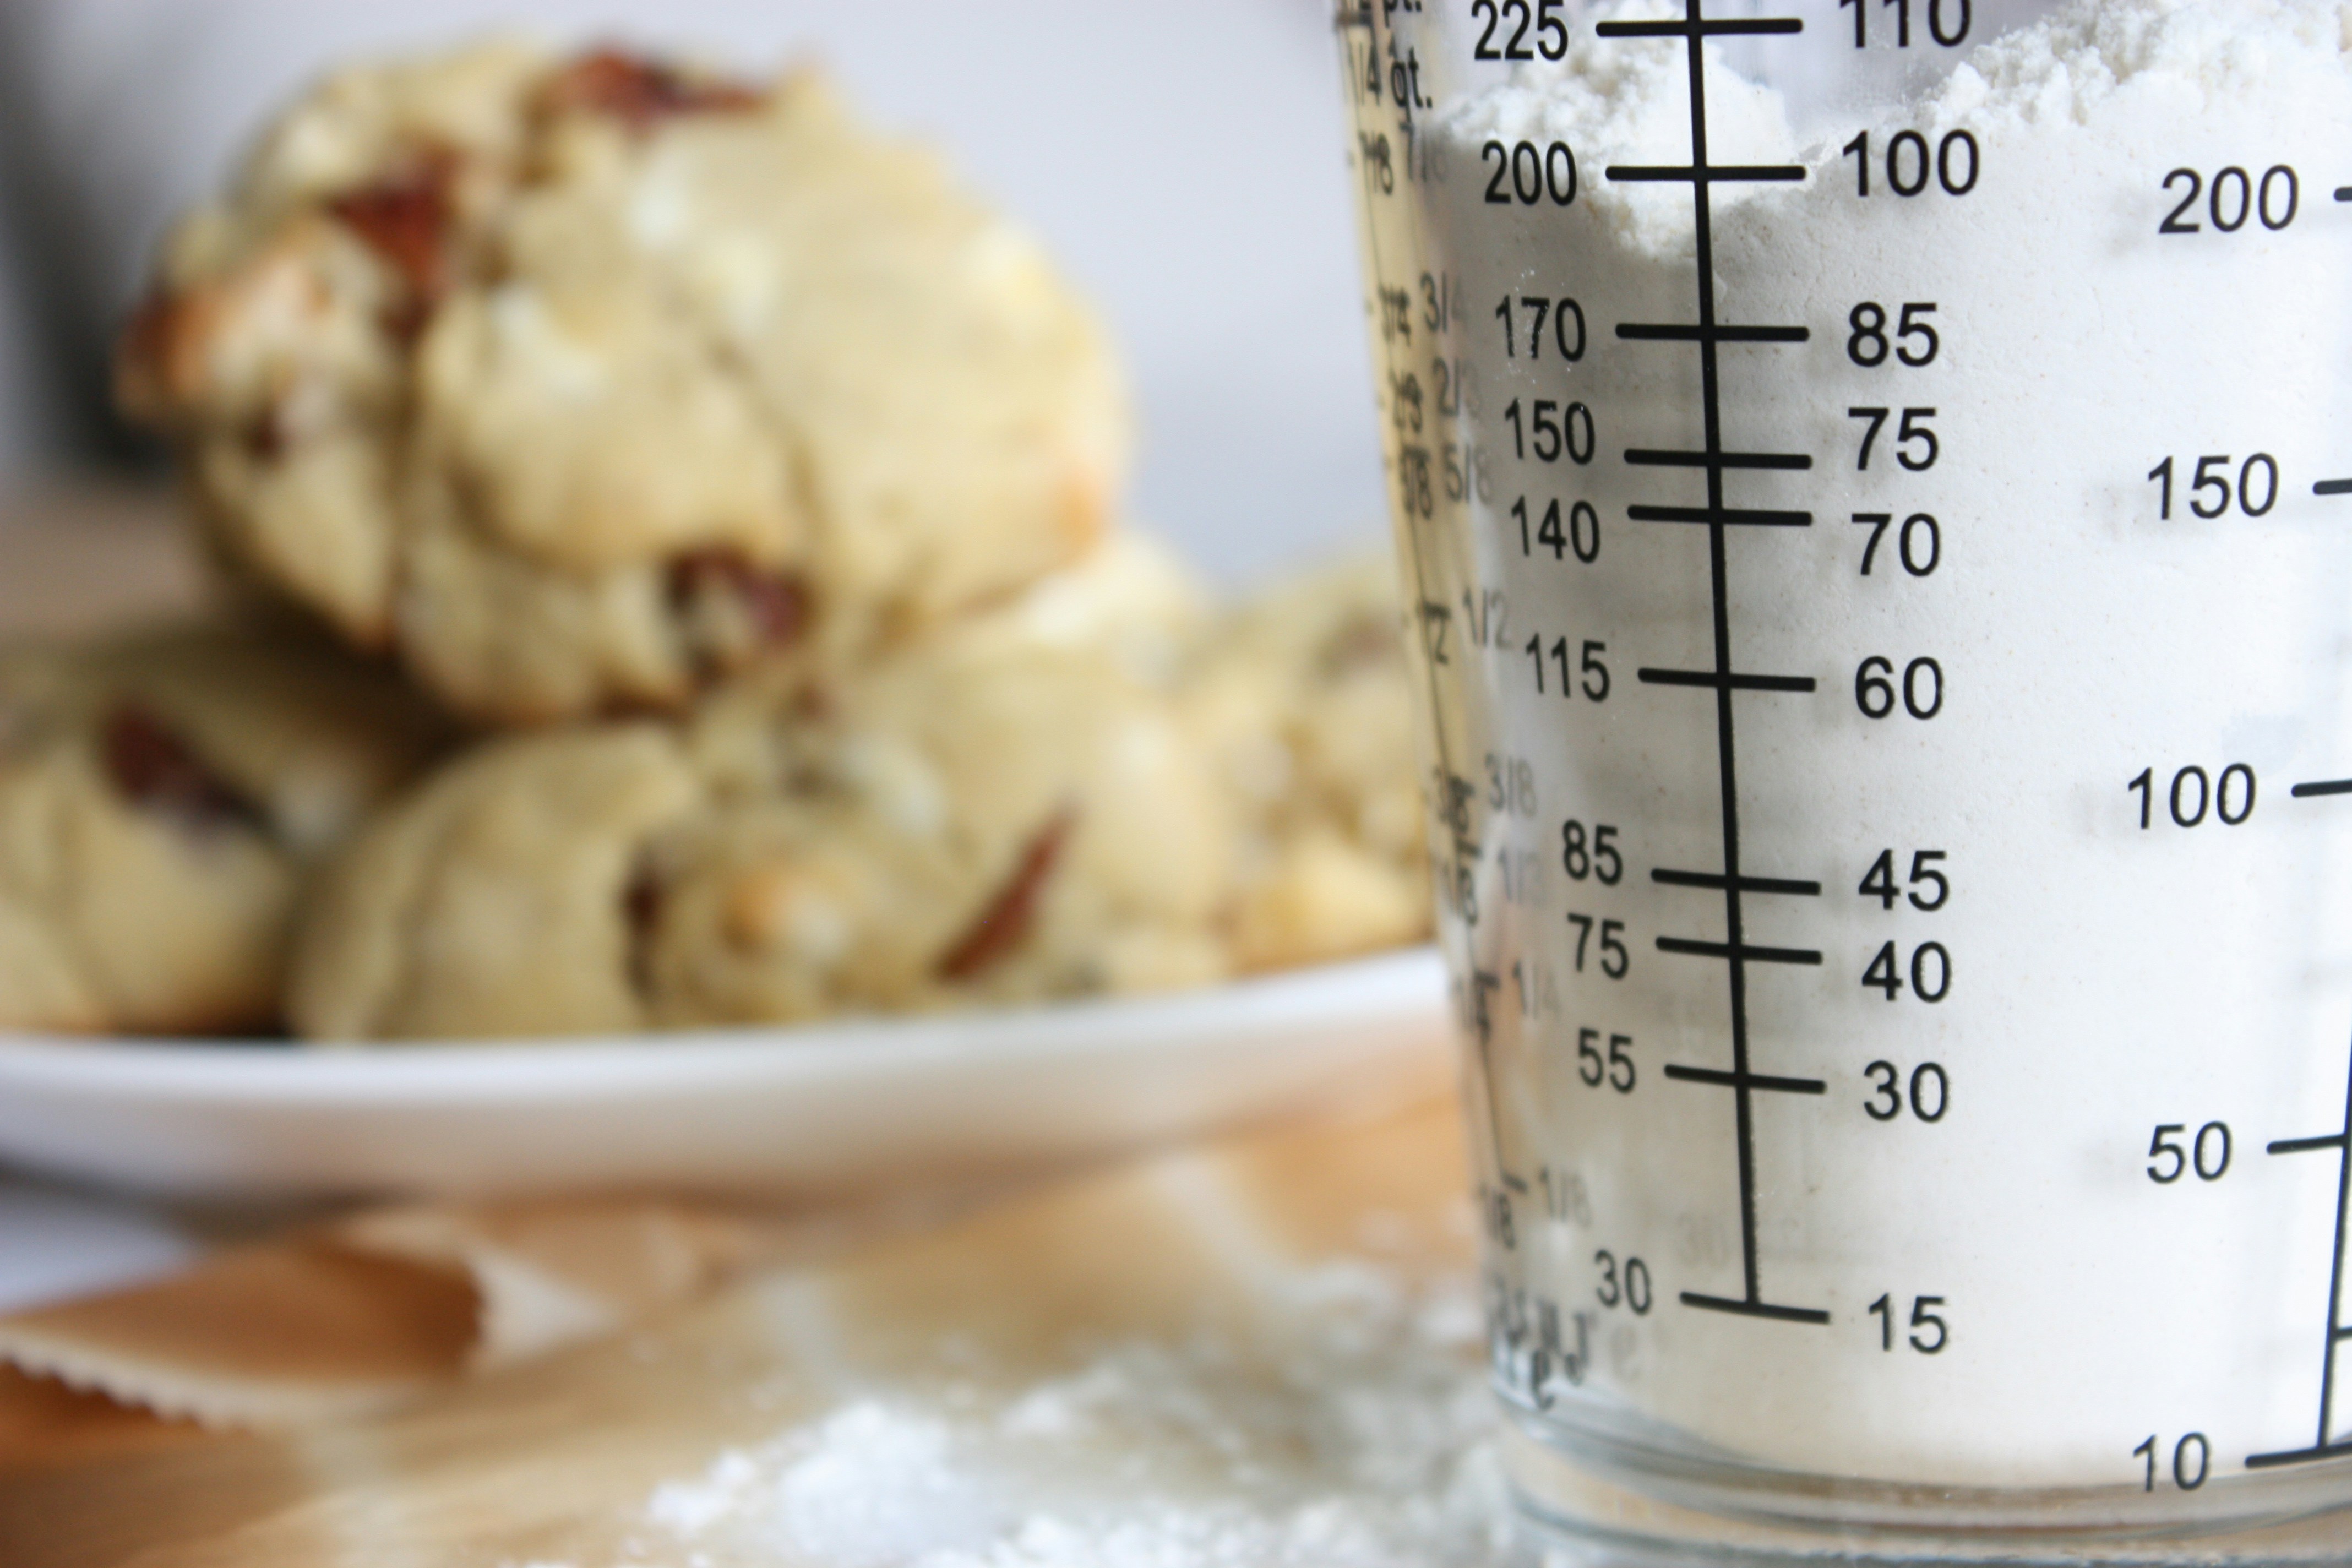 What is 250 grams in cups? · Cooking Measurements & Conversion Chart